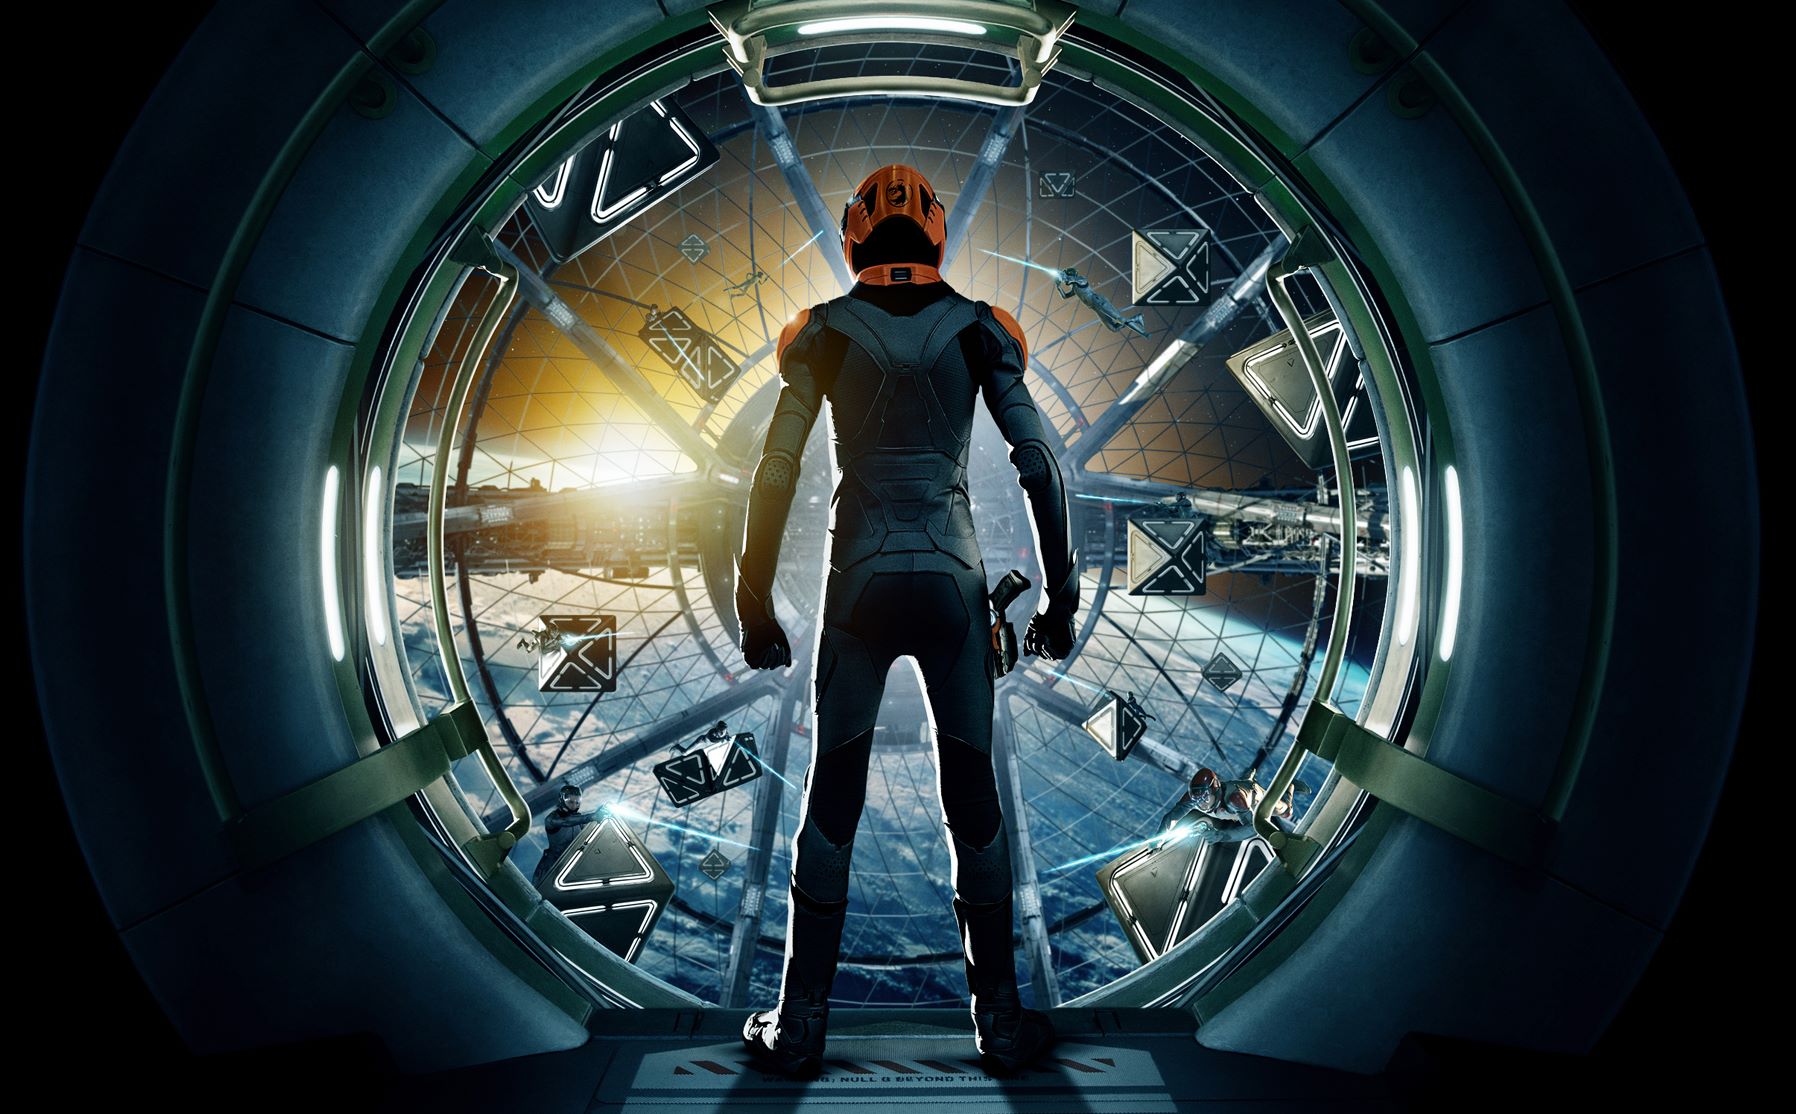 Movie Review: Ender’s Game, does it have the right moves?